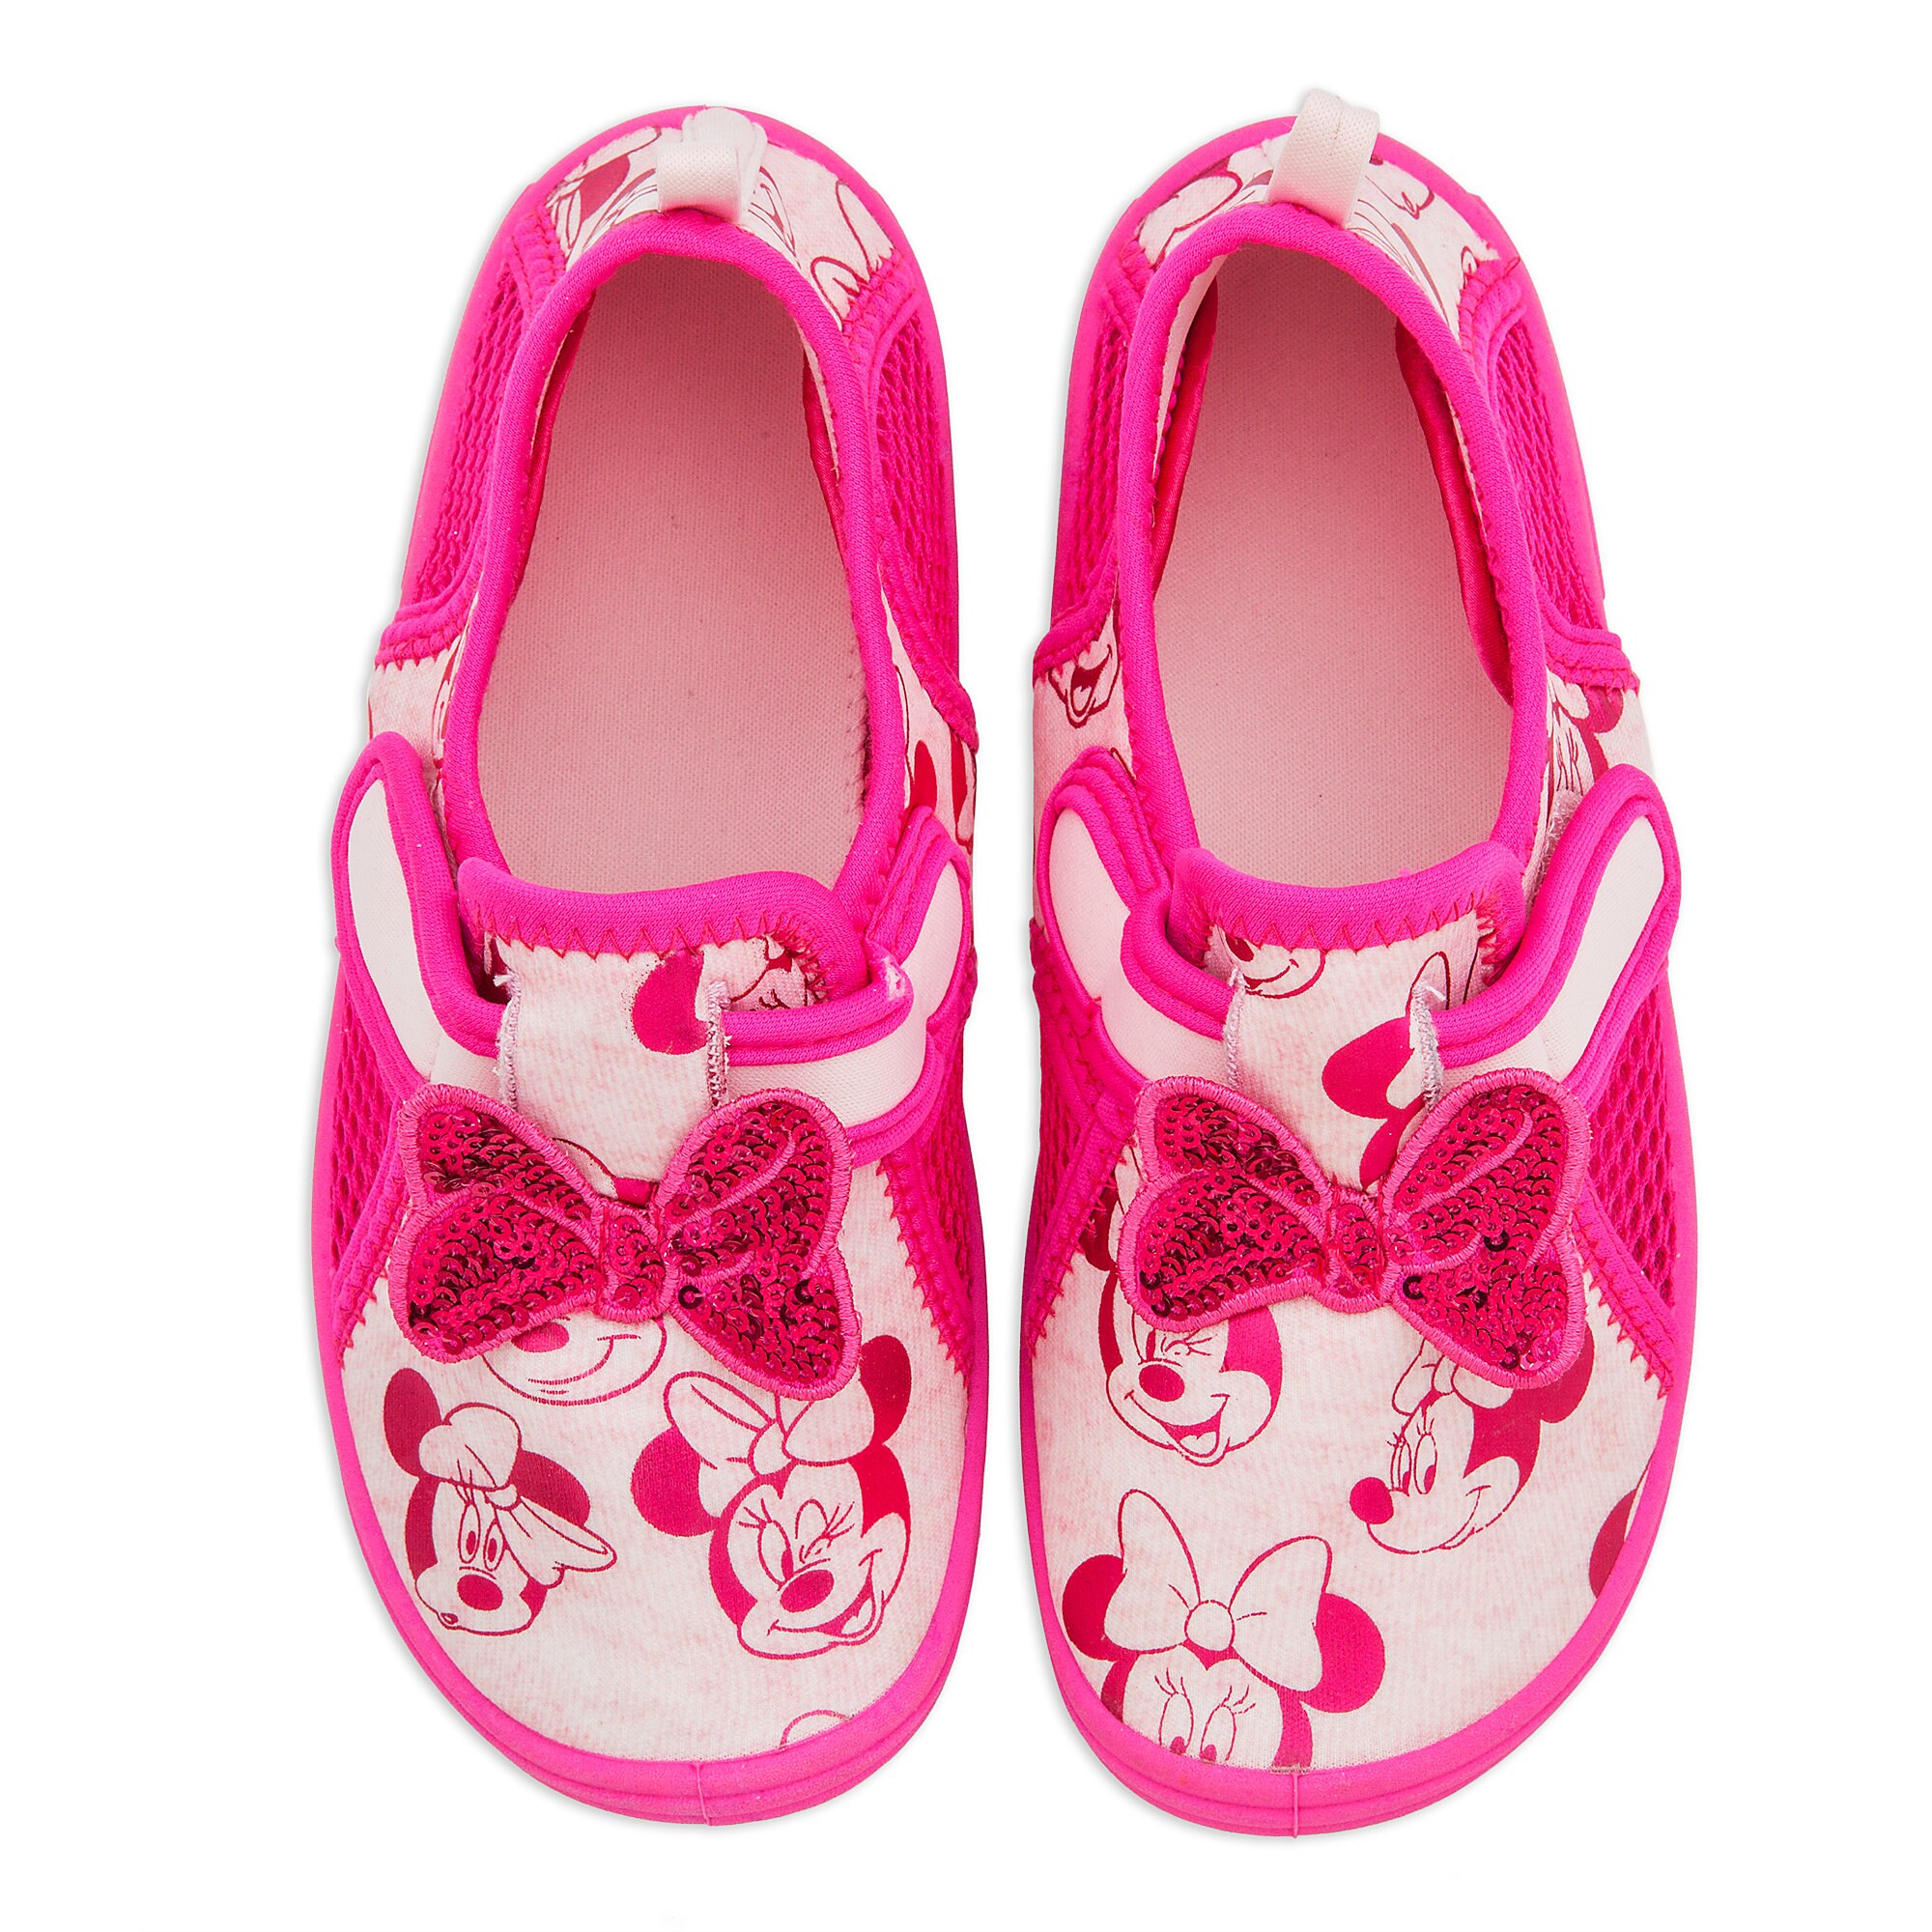 Minnie Mouse Pink Swim Shoes for Kids